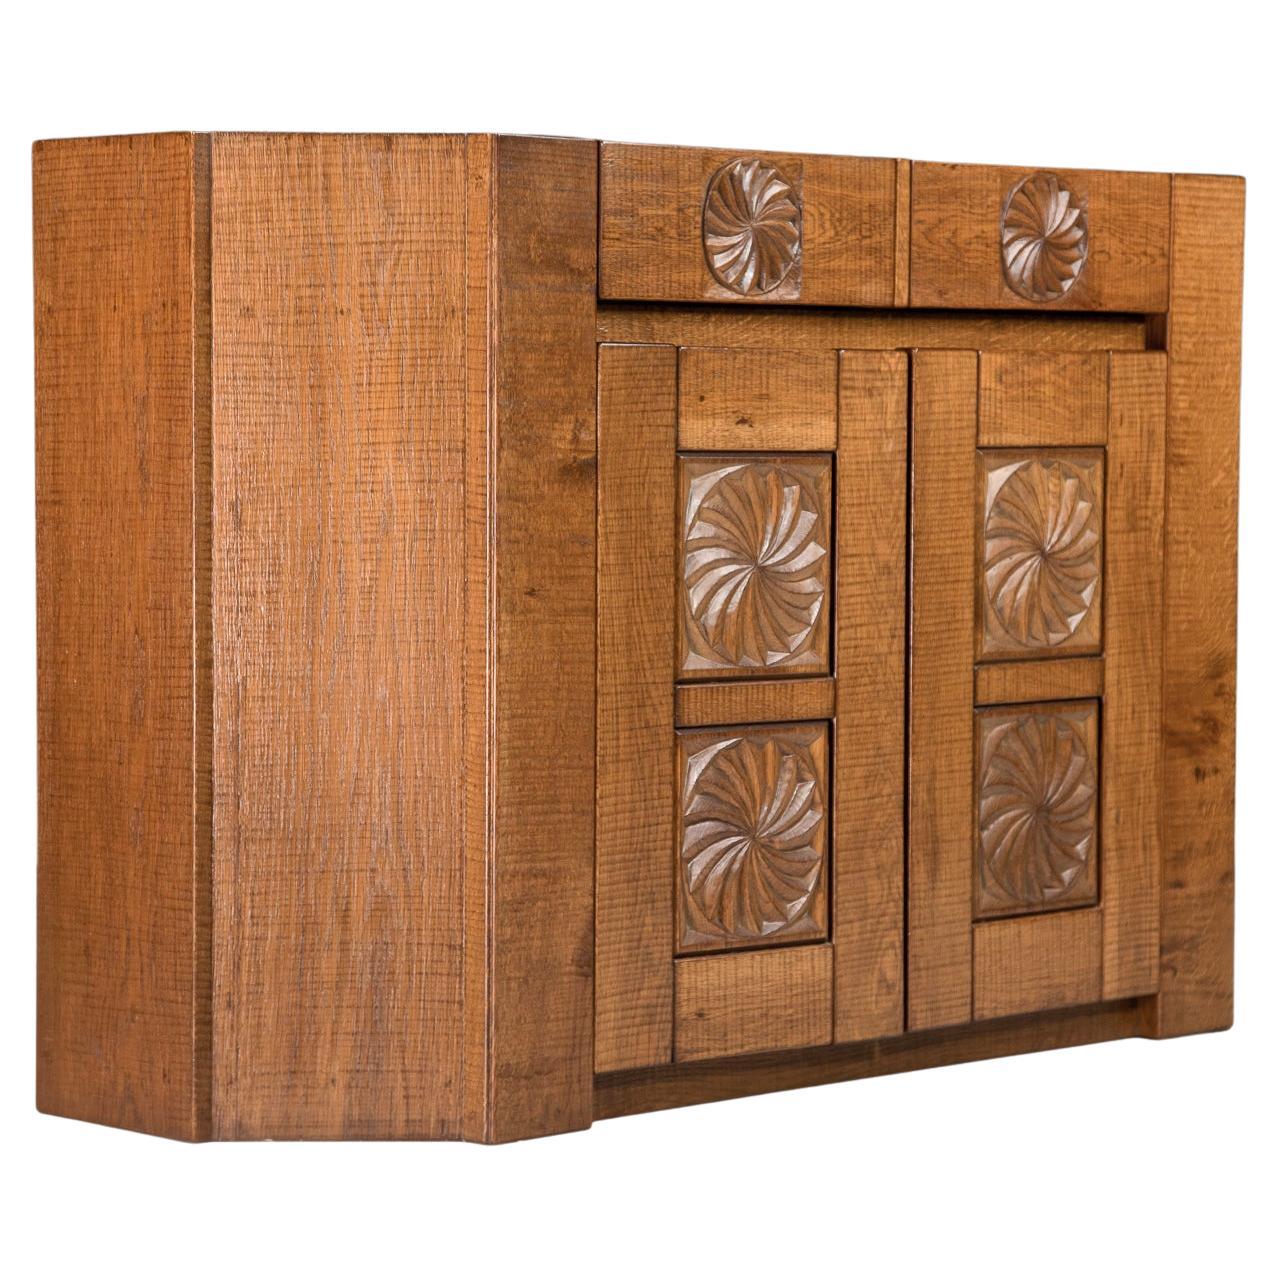 Hand Crafted Brutalist Giuseppe Rivadossi Sideboard in Oak Italy, the 1970s For Sale